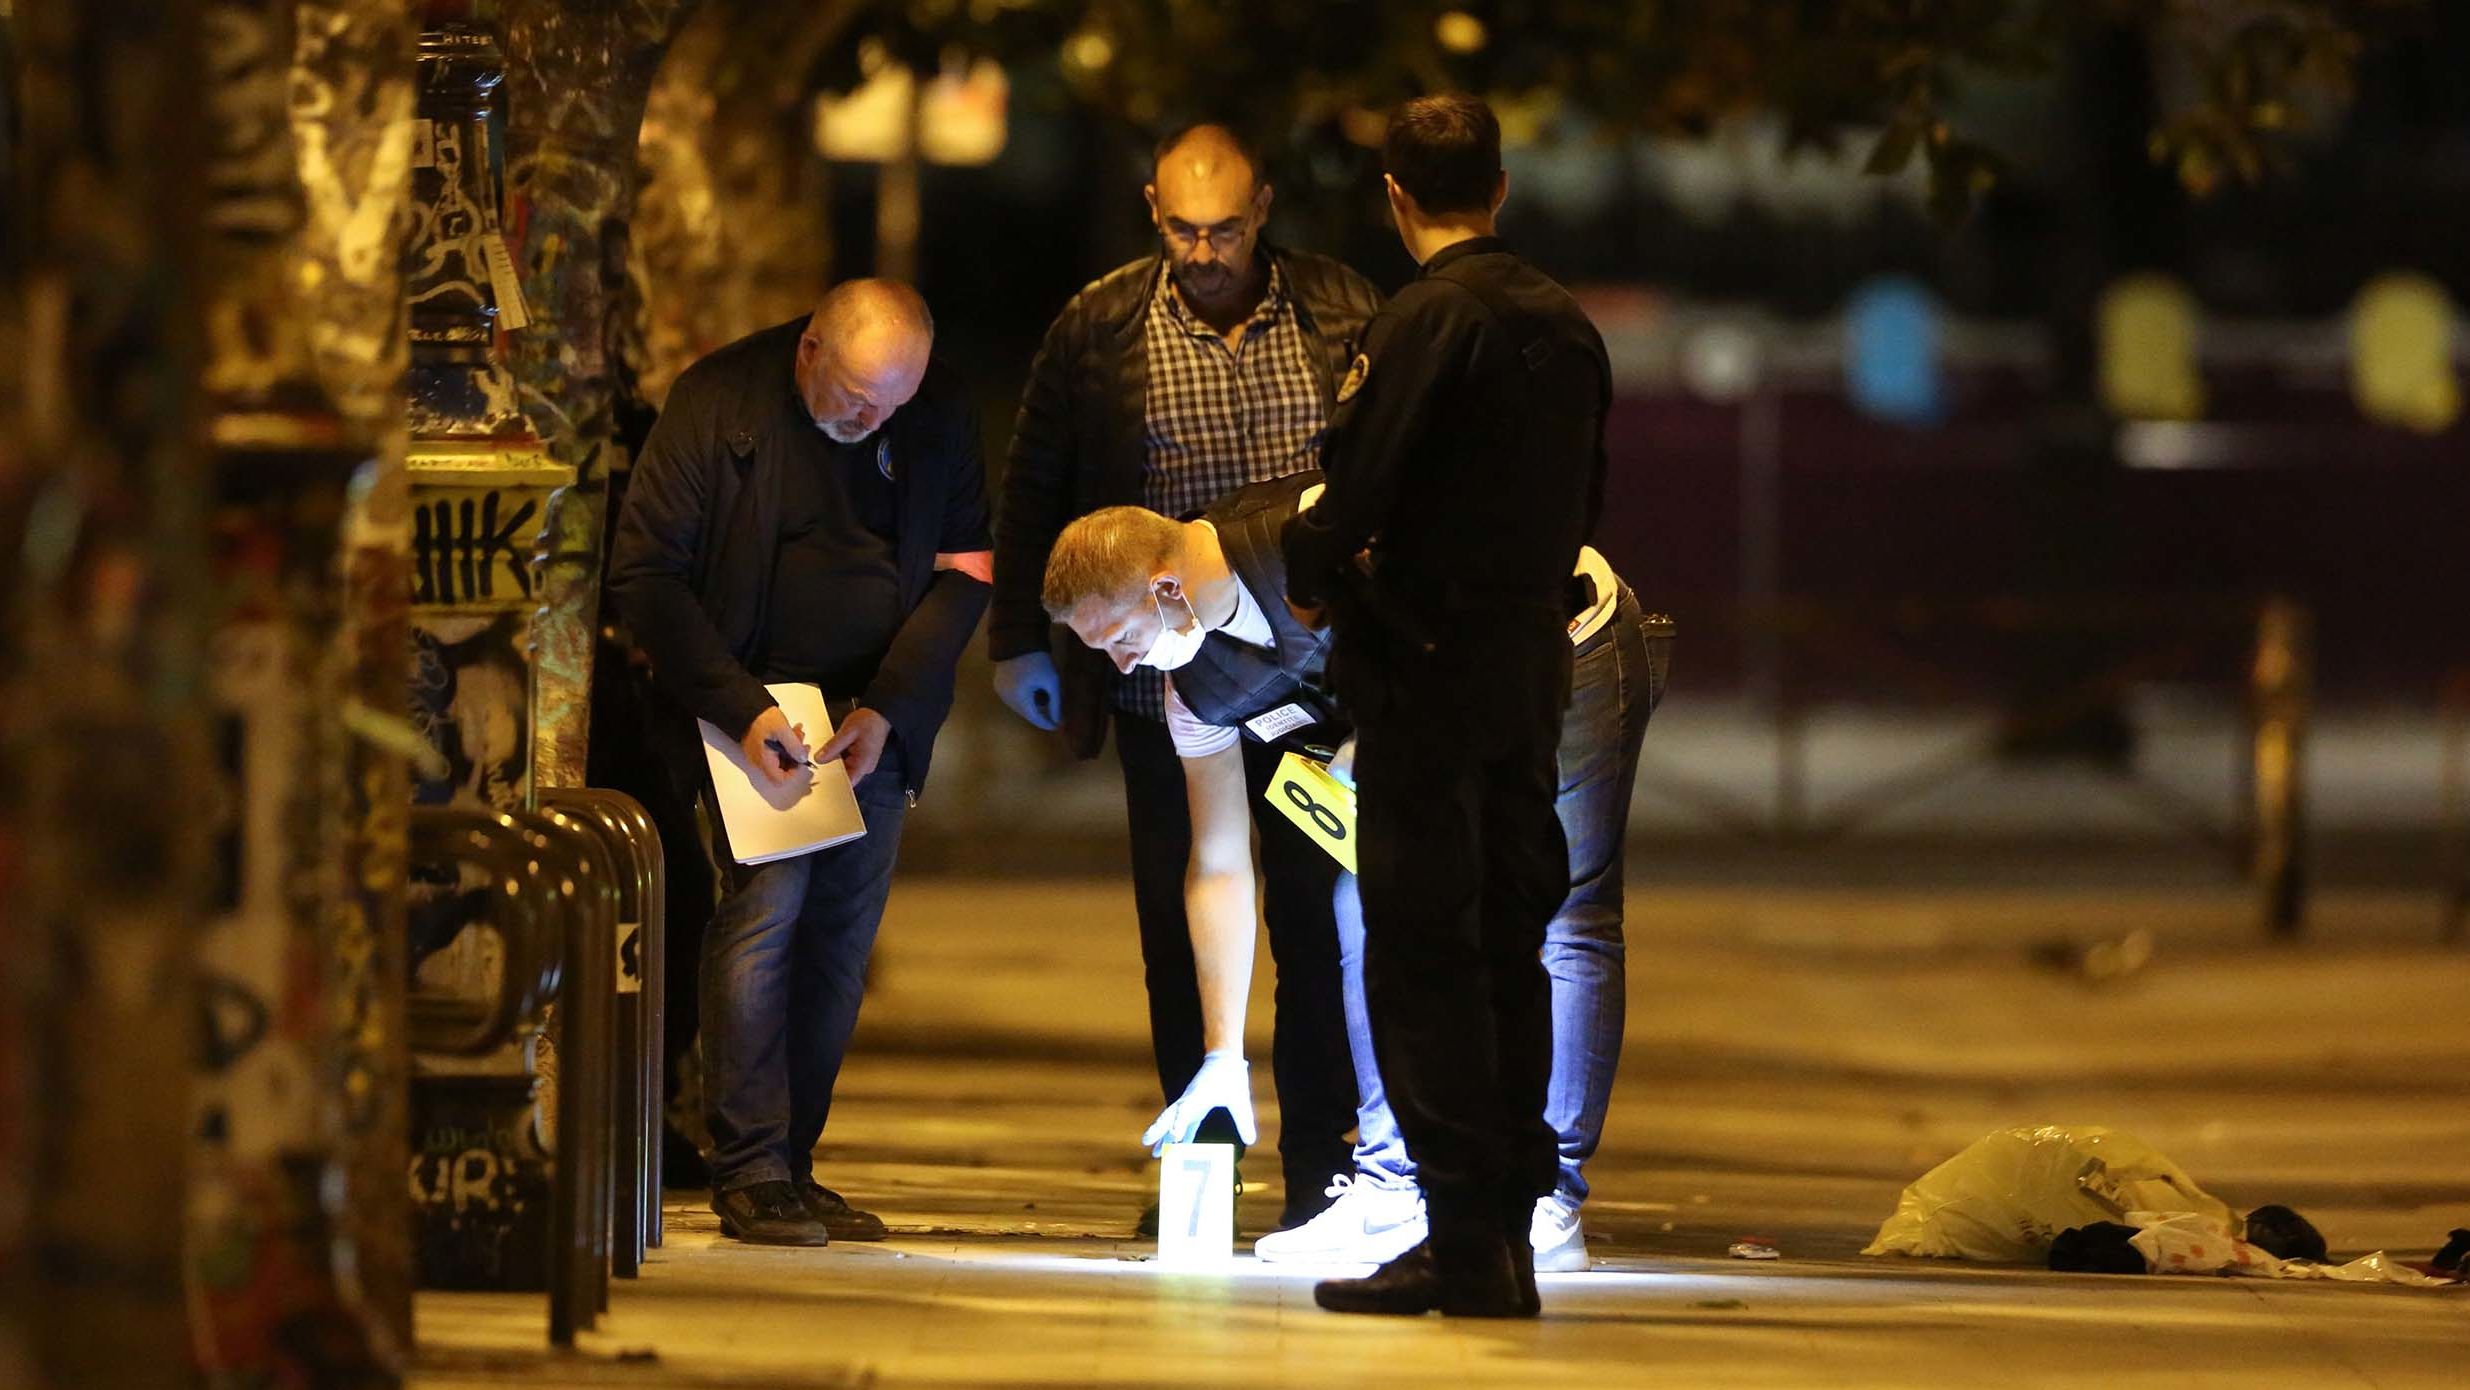 French police investigate the scene where a man attacked people with a knife Sunday night in Paris.